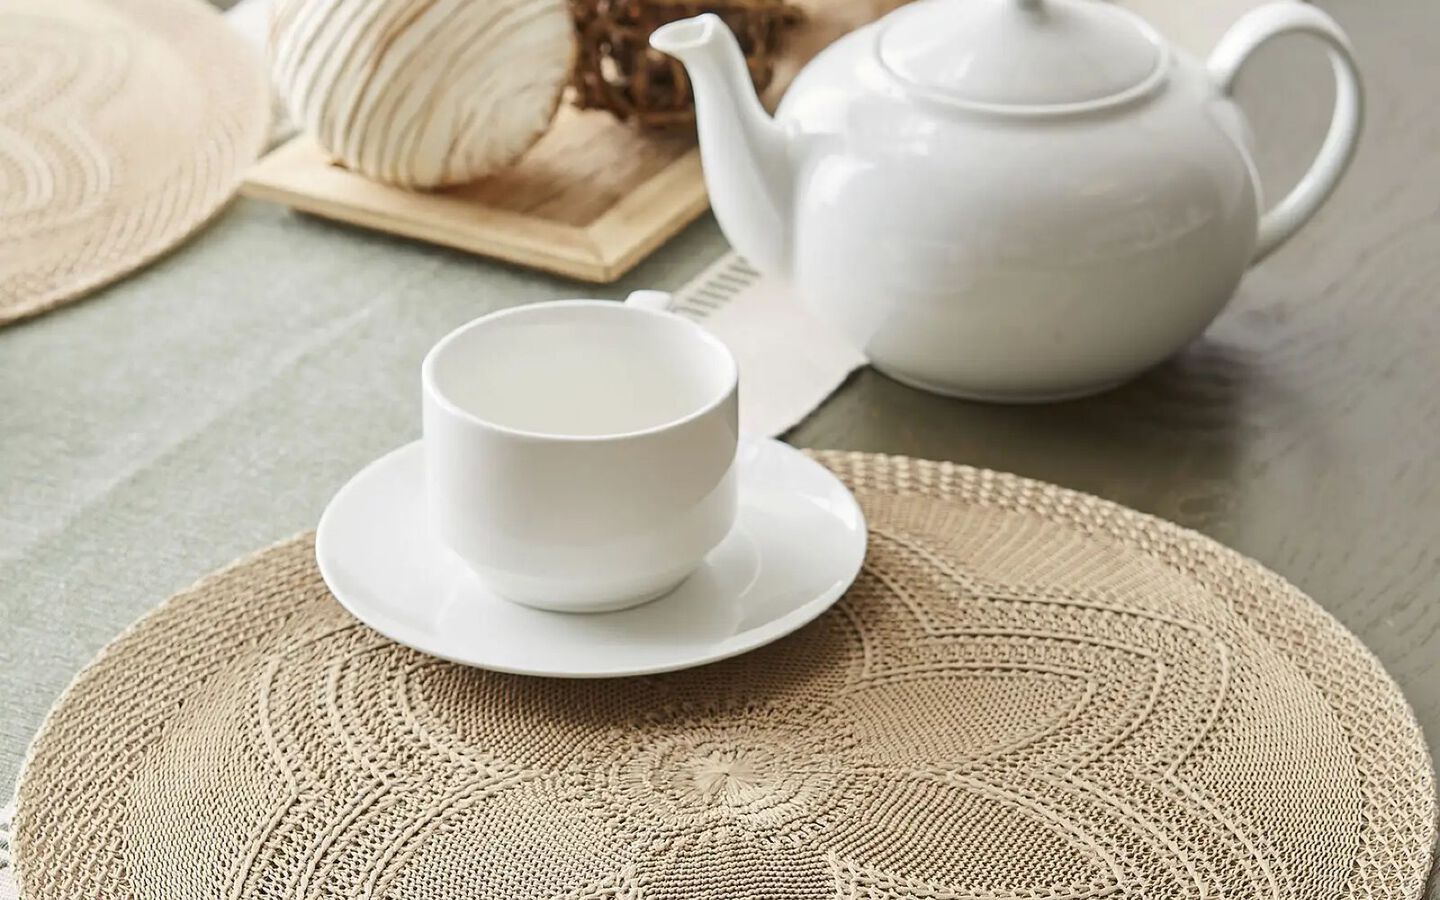 Placemat with white teacup and plate sitting on top next to a matching white teapot